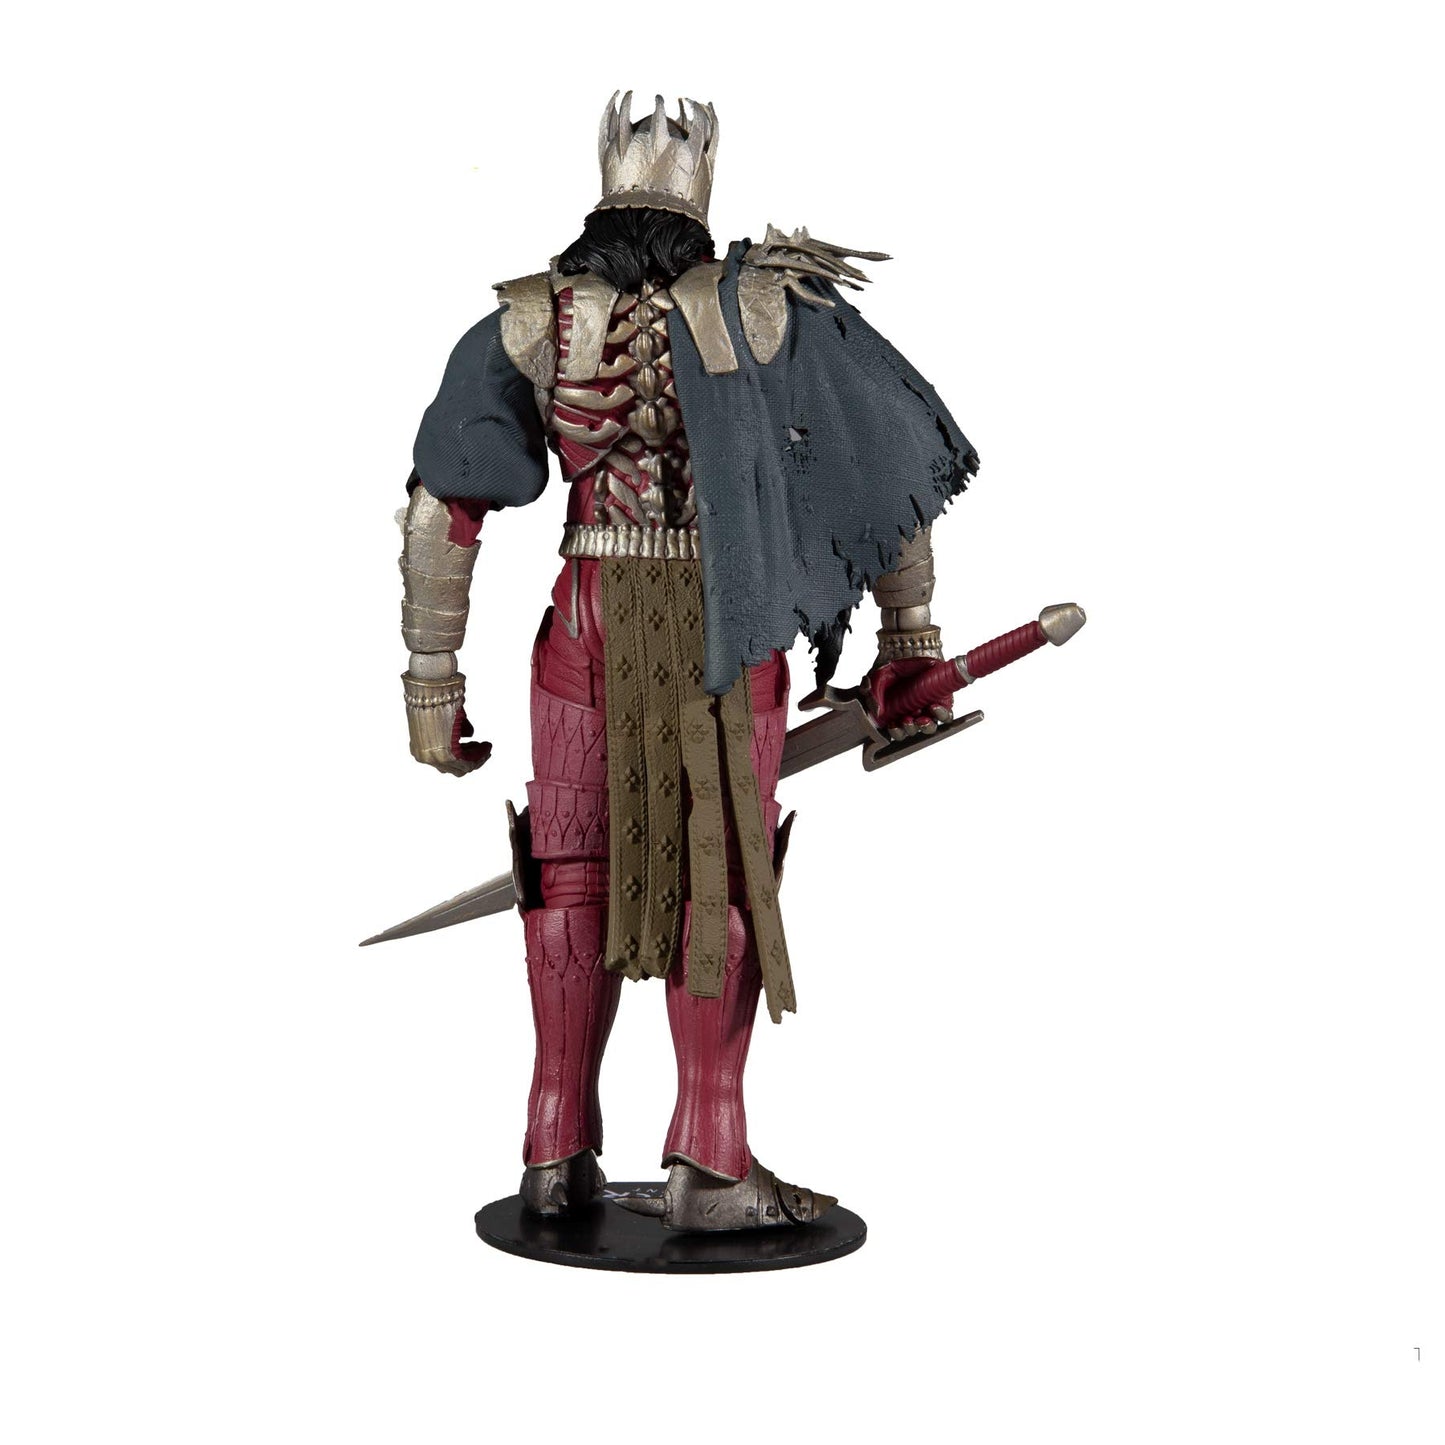 McFarlane Toys - The Witcher - Eredin Breacc Glass 7? Action Figure